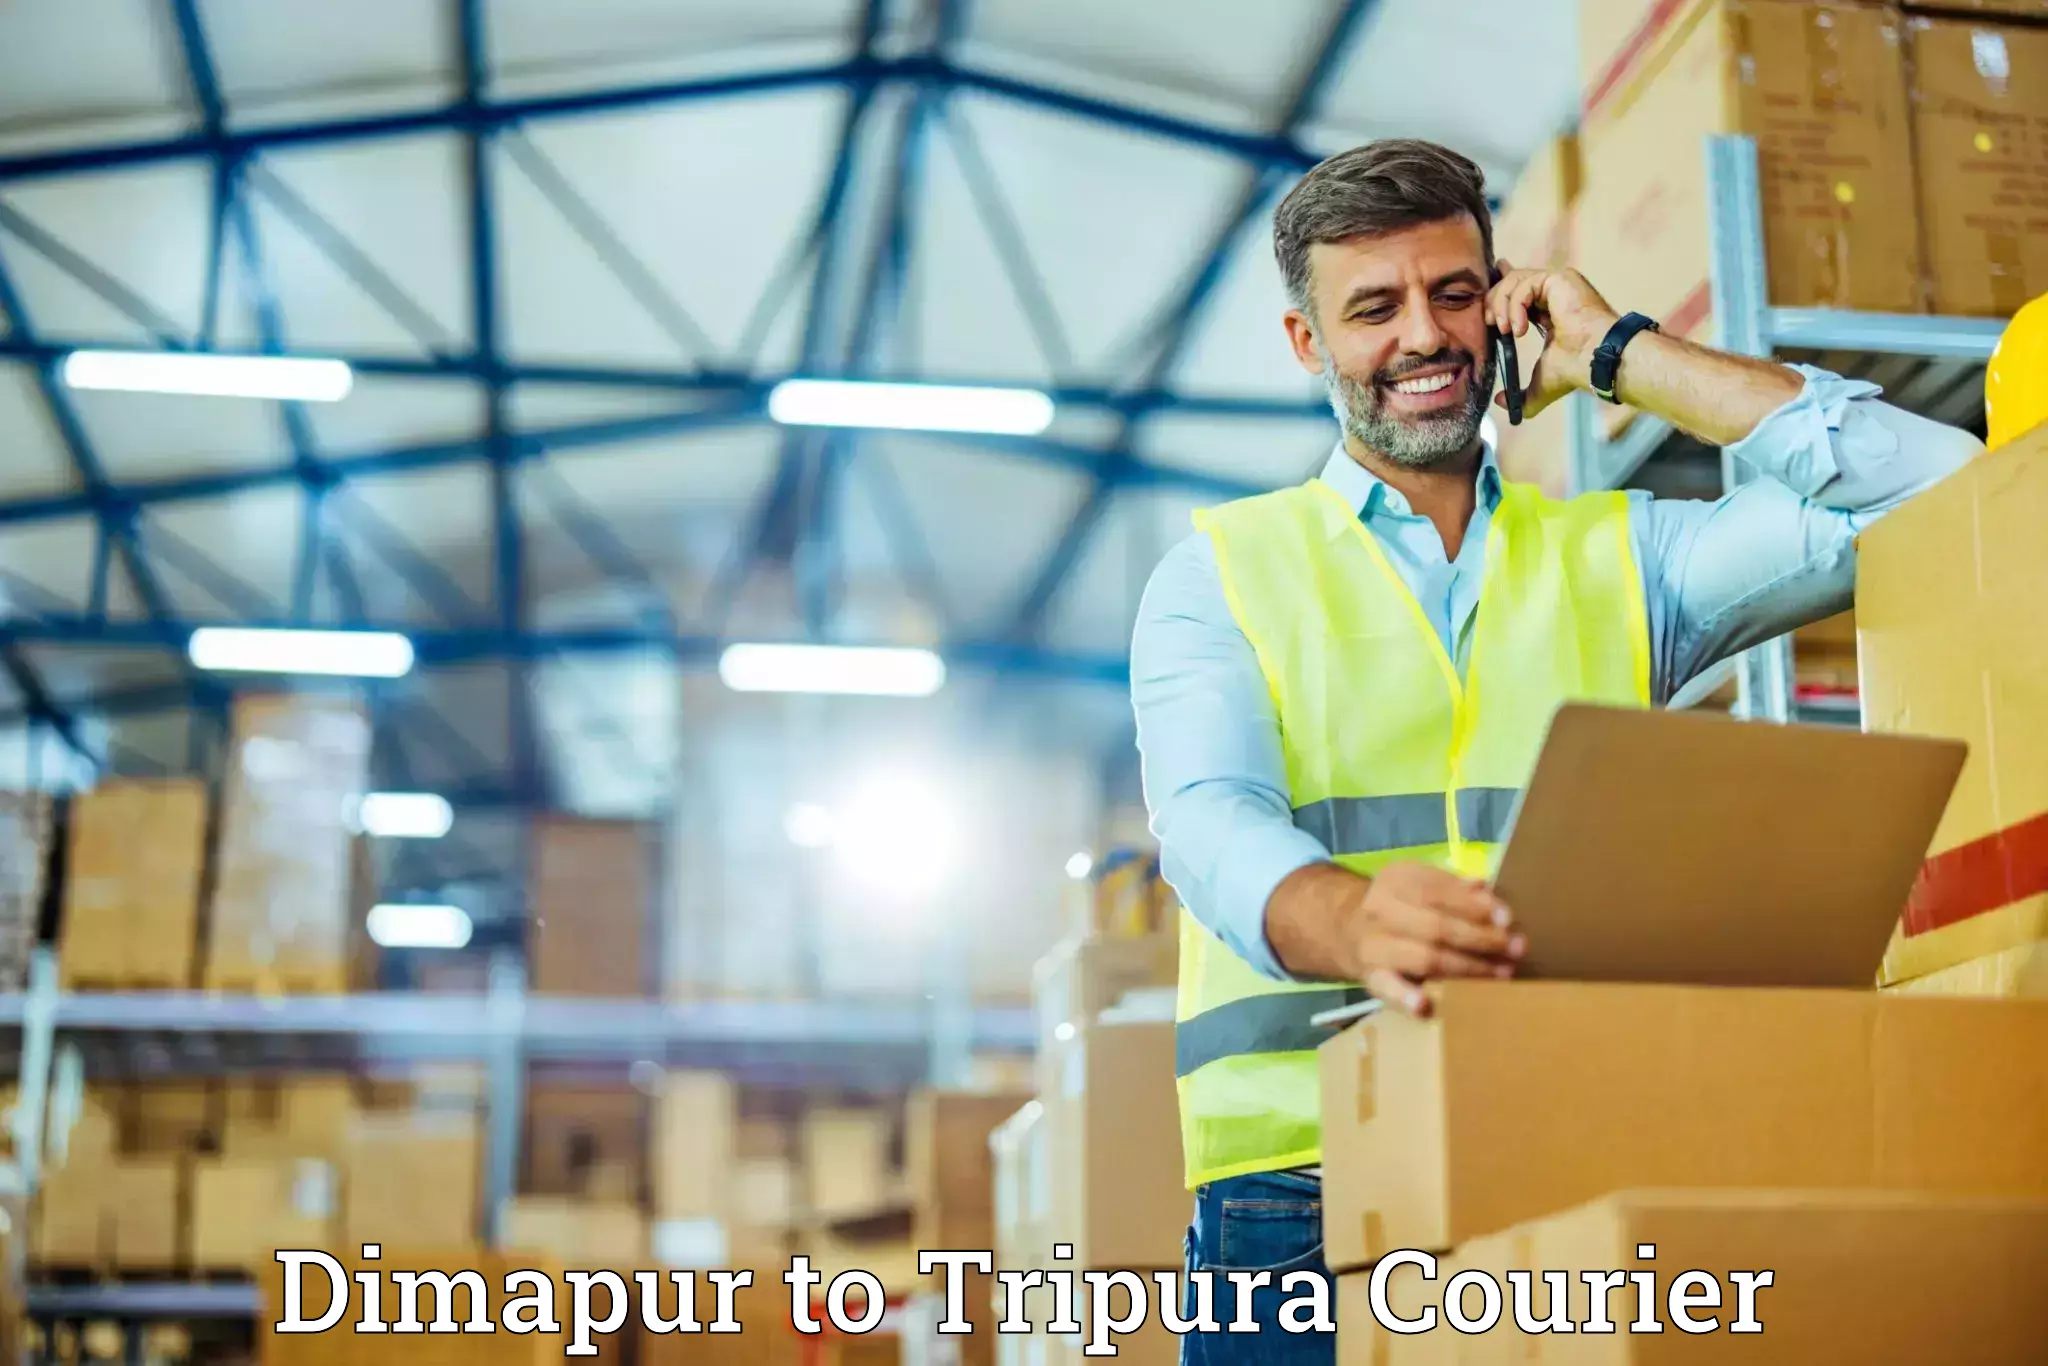 High-quality moving services Dimapur to Amarpur